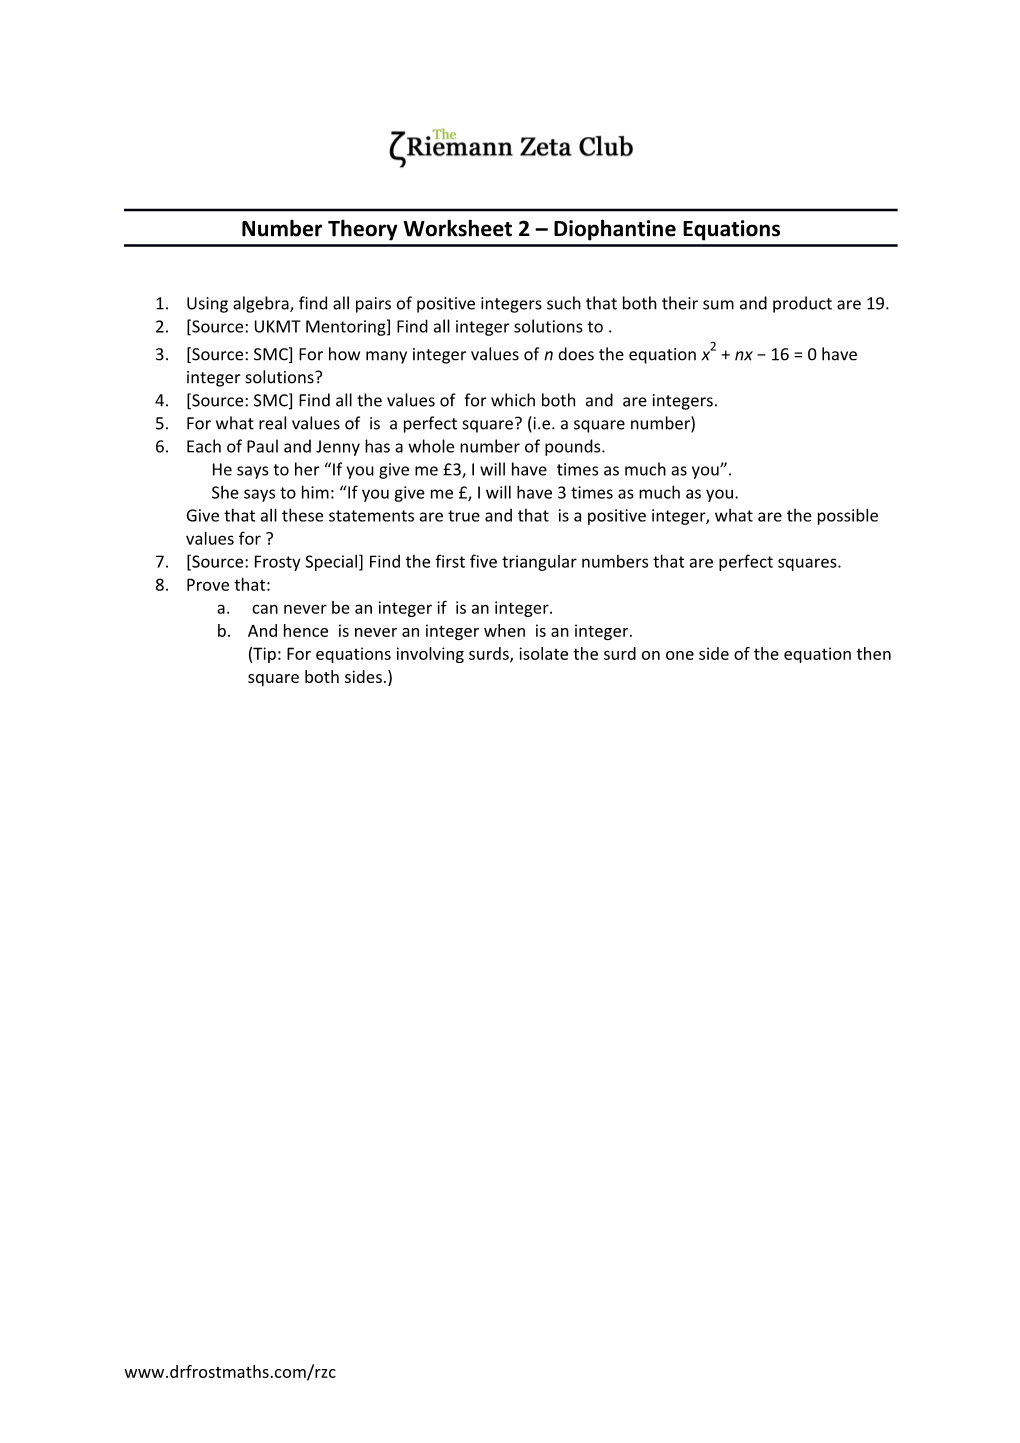 Number Theory Worksheet 2 Diophantine Equations